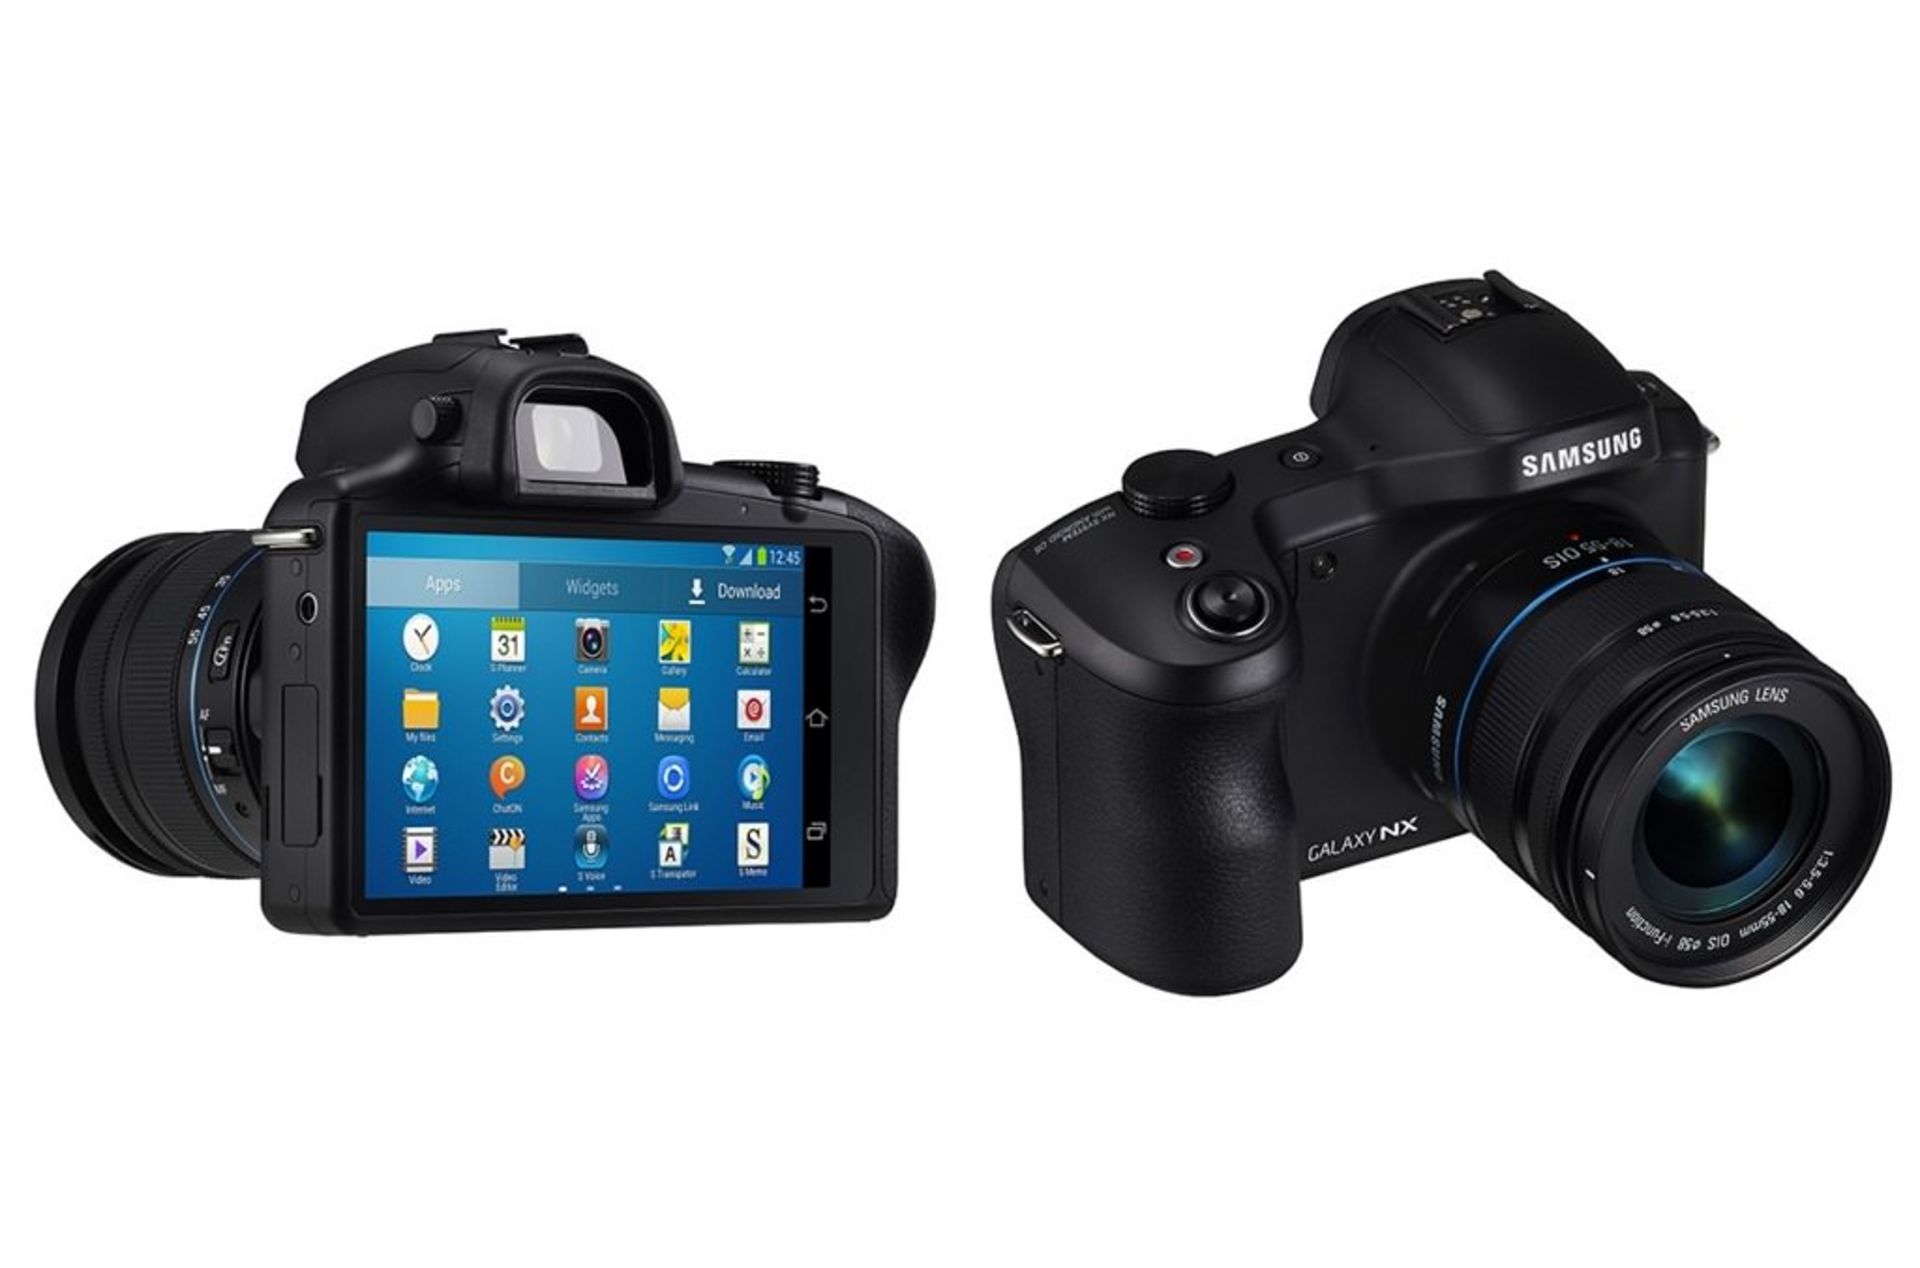 Android-was-initially-planned-to-be-an-OS-for-digital-cameras. Copy